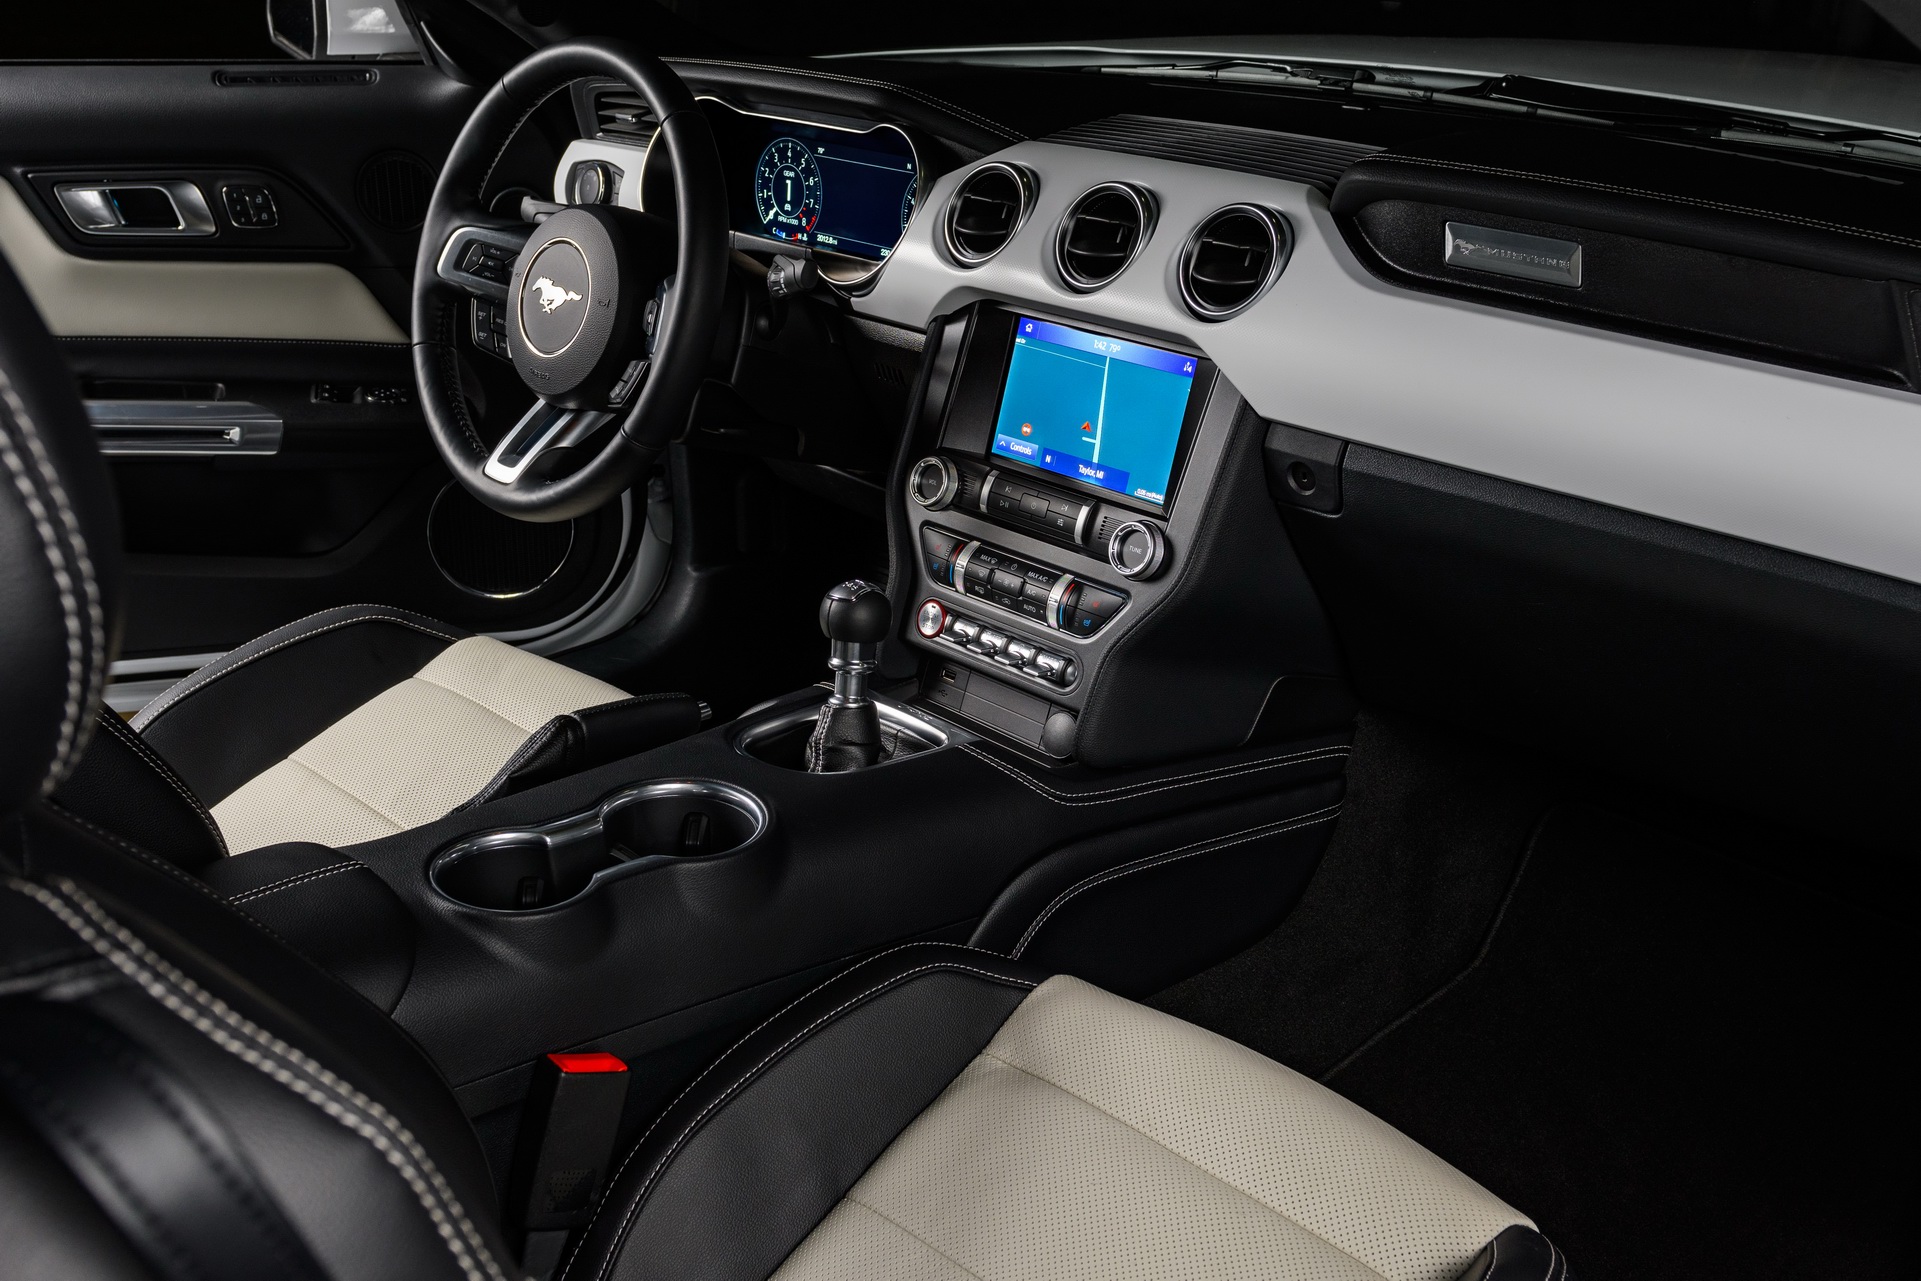 2022 Ford Mustang Ice White Appearance Package Interior Wallpapers #14 of 24